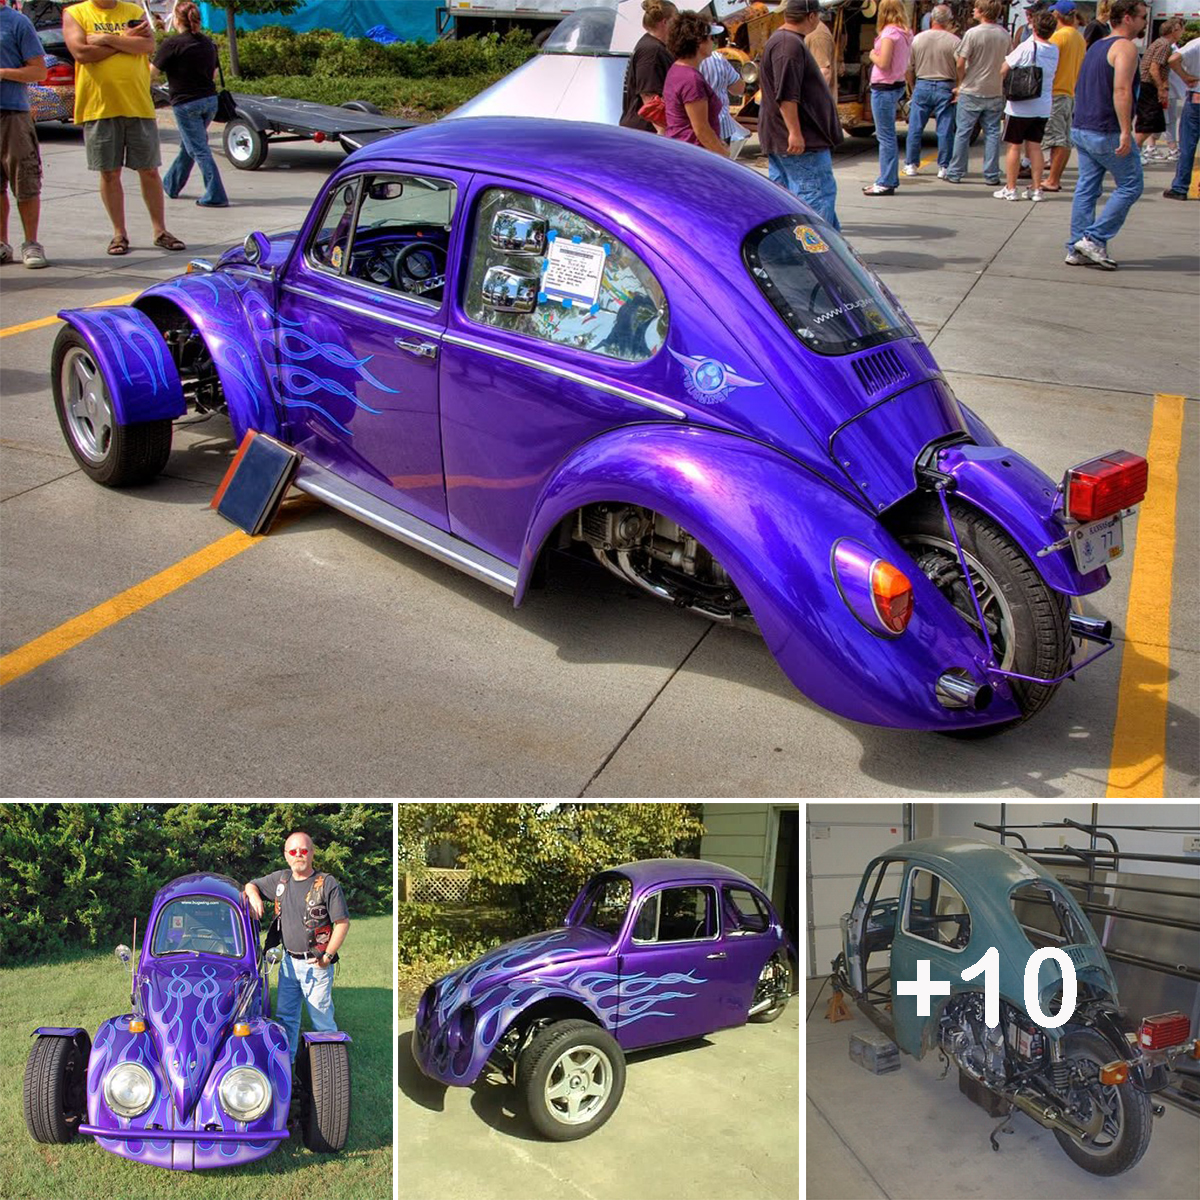 The Unique Design of a Beetle VW Trike-Inspired Tricycle